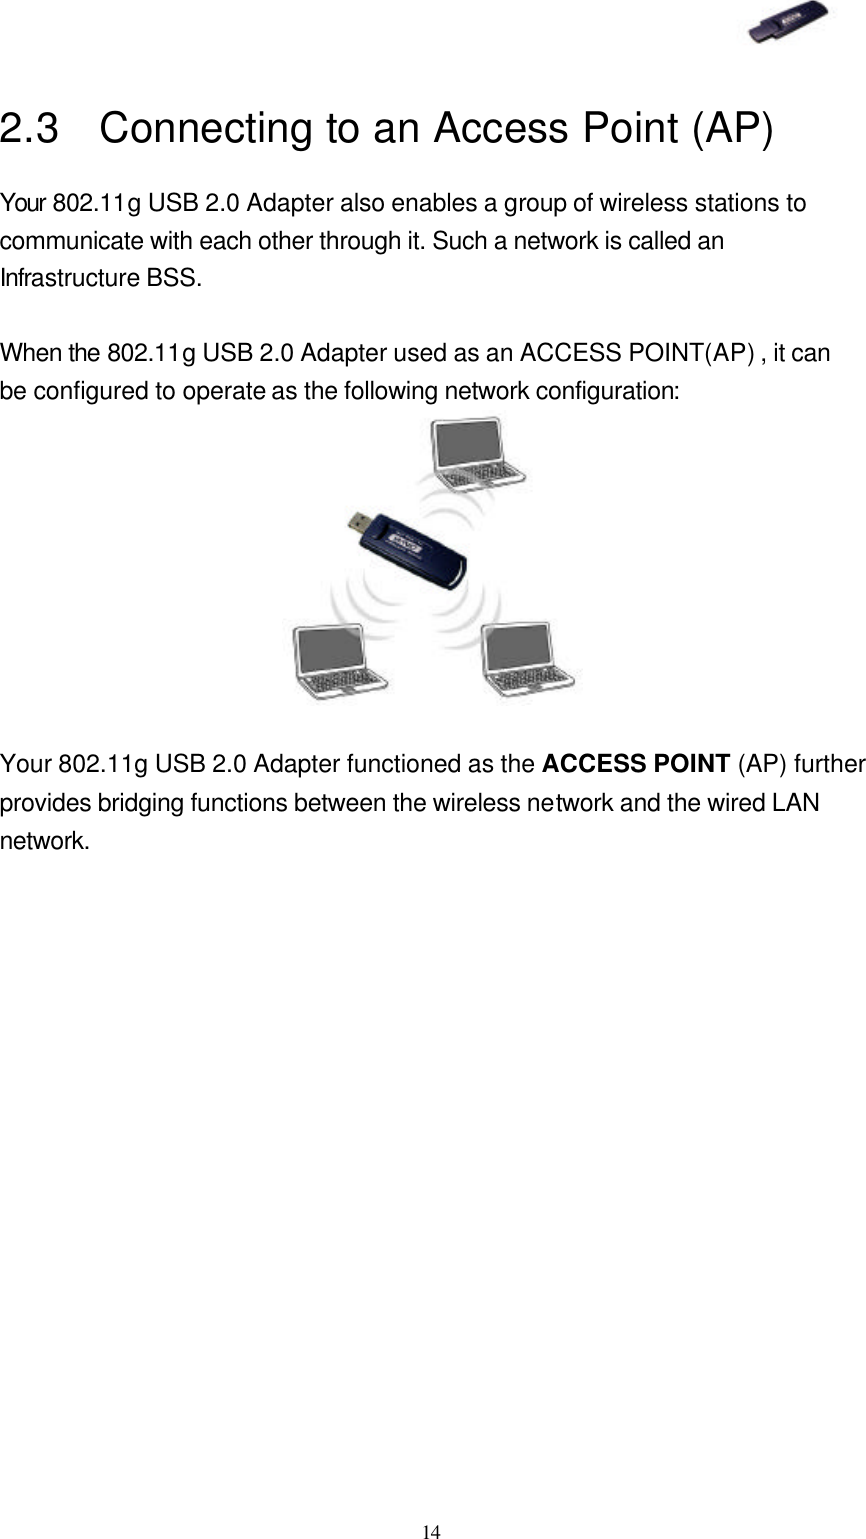   14 2.3 Connecting to an Access Point (AP) Your 802.11g USB 2.0 Adapter also enables a group of wireless stations to communicate with each other through it. Such a network is called an Infrastructure BSS.   When the 802.11g USB 2.0 Adapter used as an ACCESS POINT(AP) , it can be configured to operate as the following network configuration:   Your 802.11g USB 2.0 Adapter functioned as the ACCESS POINT (AP) further provides bridging functions between the wireless network and the wired LAN network.  